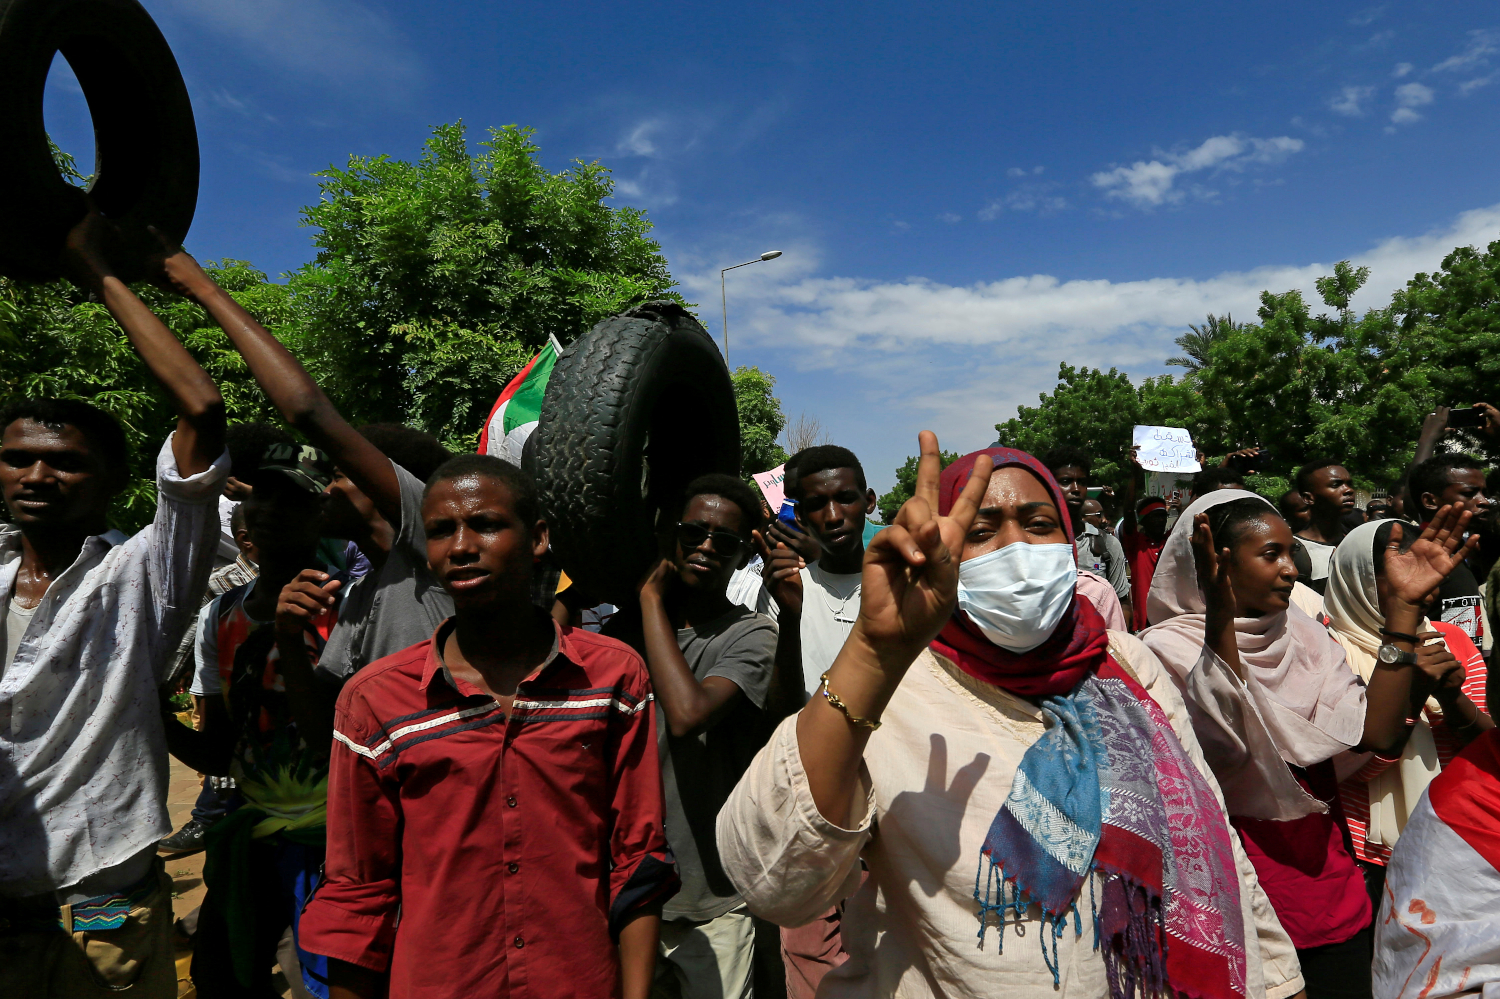 Sudanese protesters march in a demonstration to mark the anniversary of a transitional power-sharing deal with demands for quicker political reforms, Khartoum, Sudan 17 August 2020. Reuters, Mohamed Nureldin Abdallah.